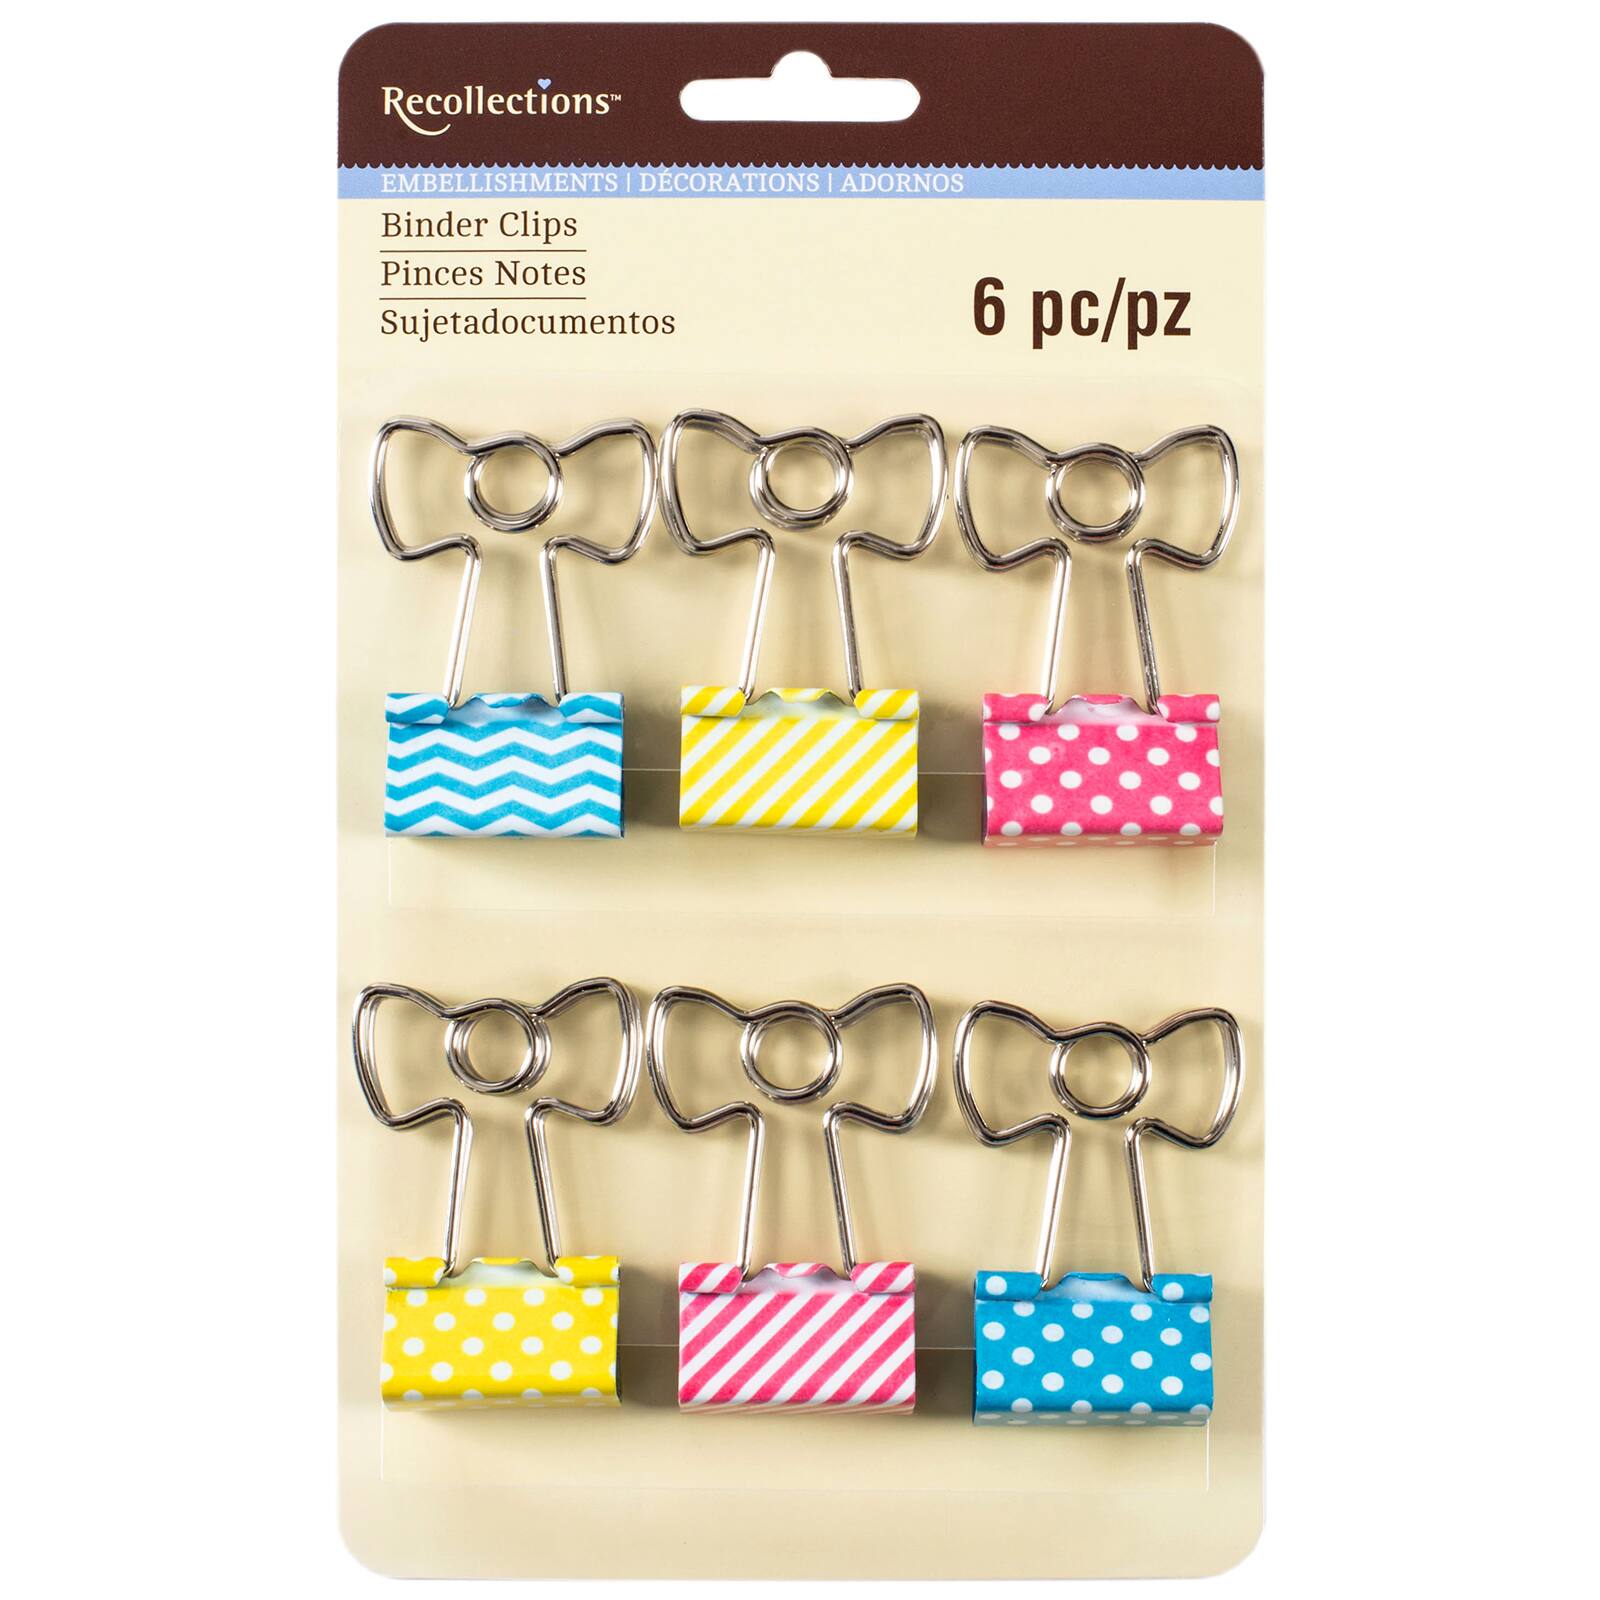 Shop for the Bow Binder Clips by 